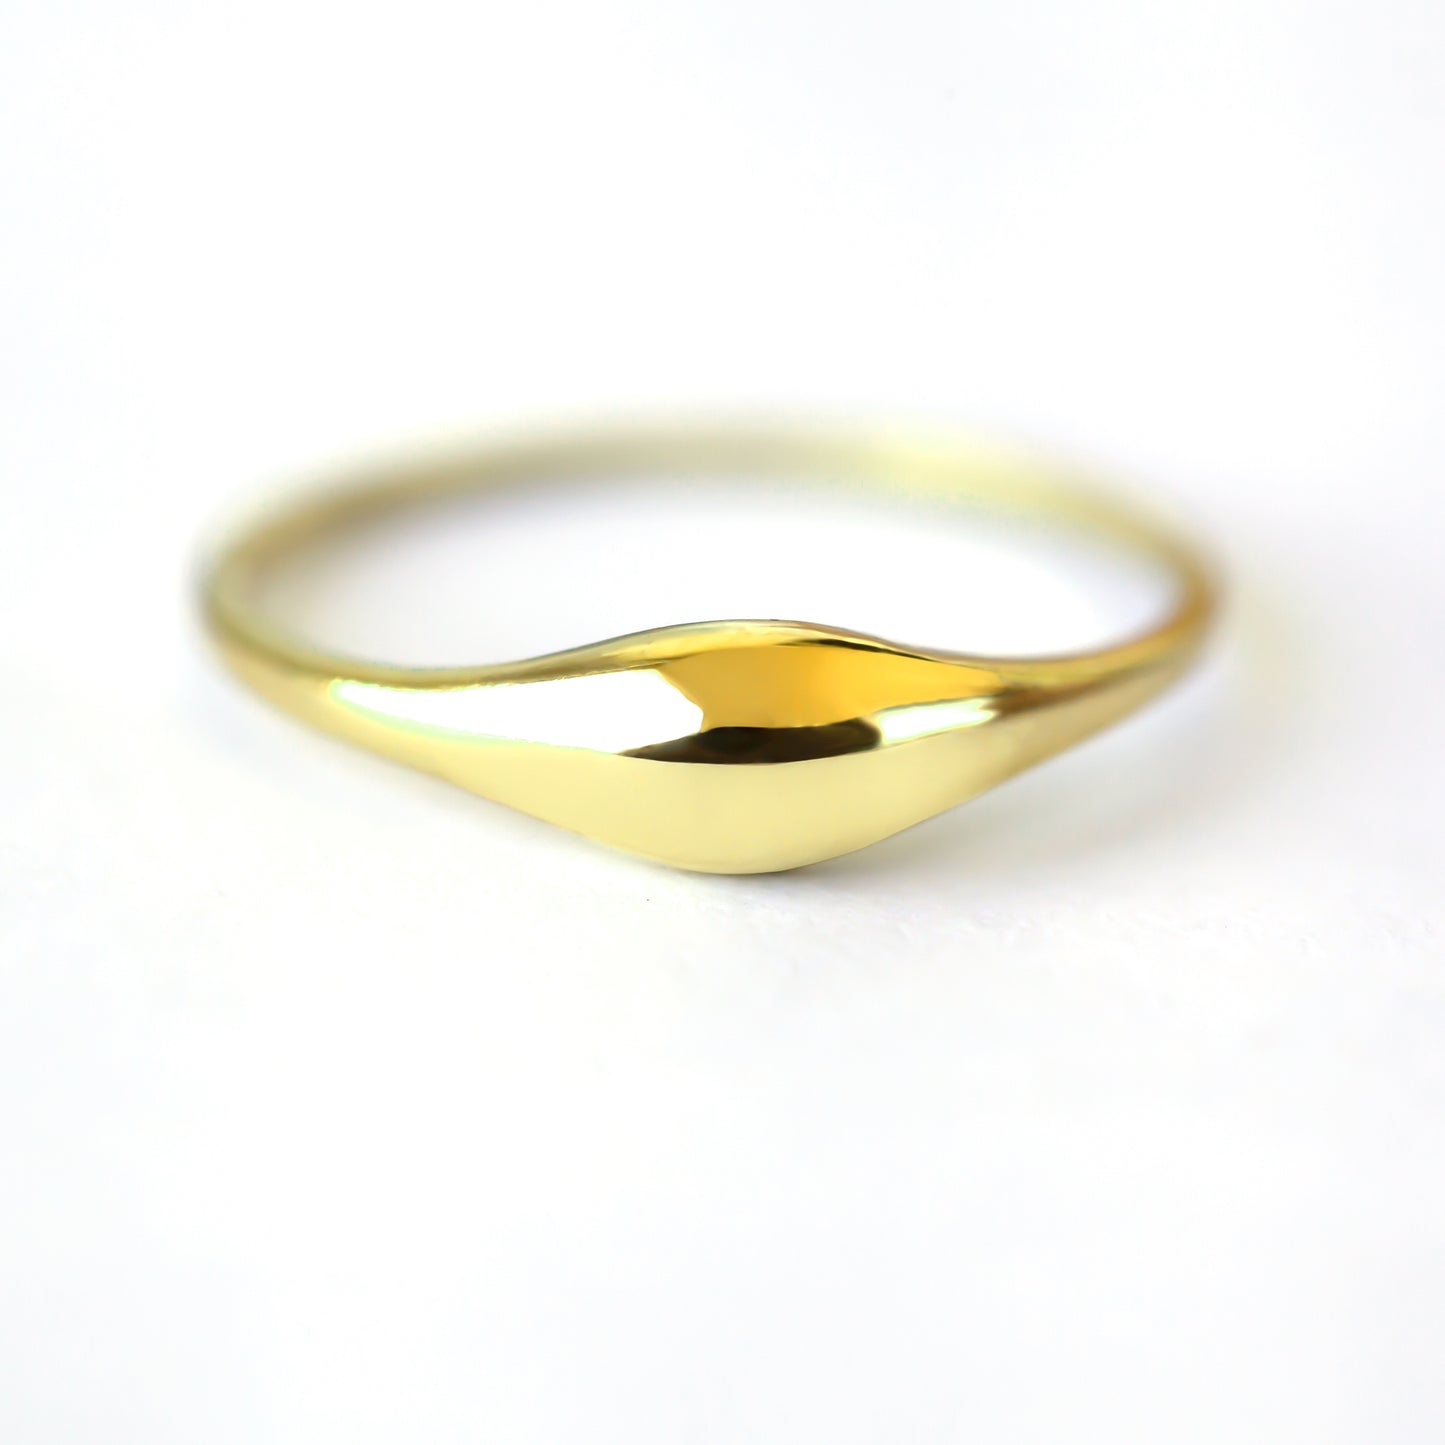 Minimalist Dome Ring in 14K Solid Gold